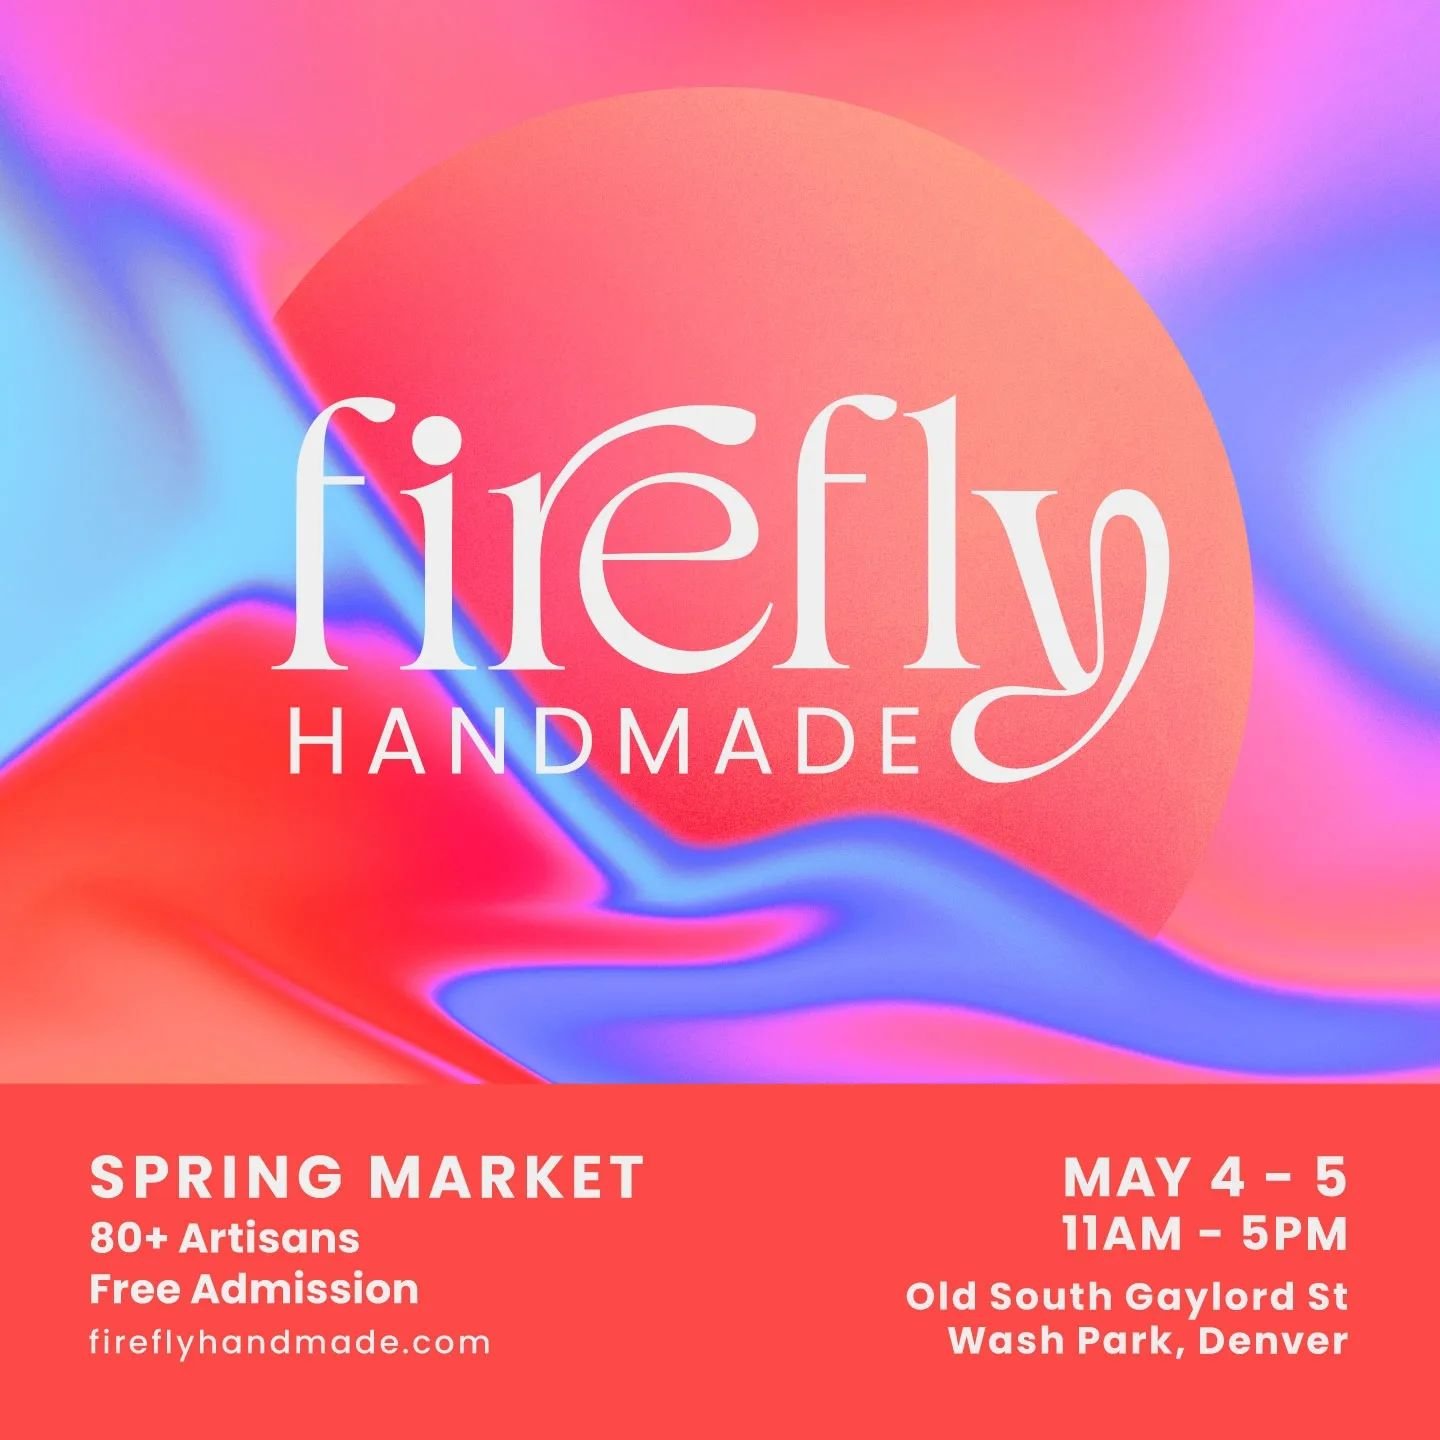 Come check out the market this weekend! I'm so excited to be able to be a part of @fireflyhandmade for the first time!